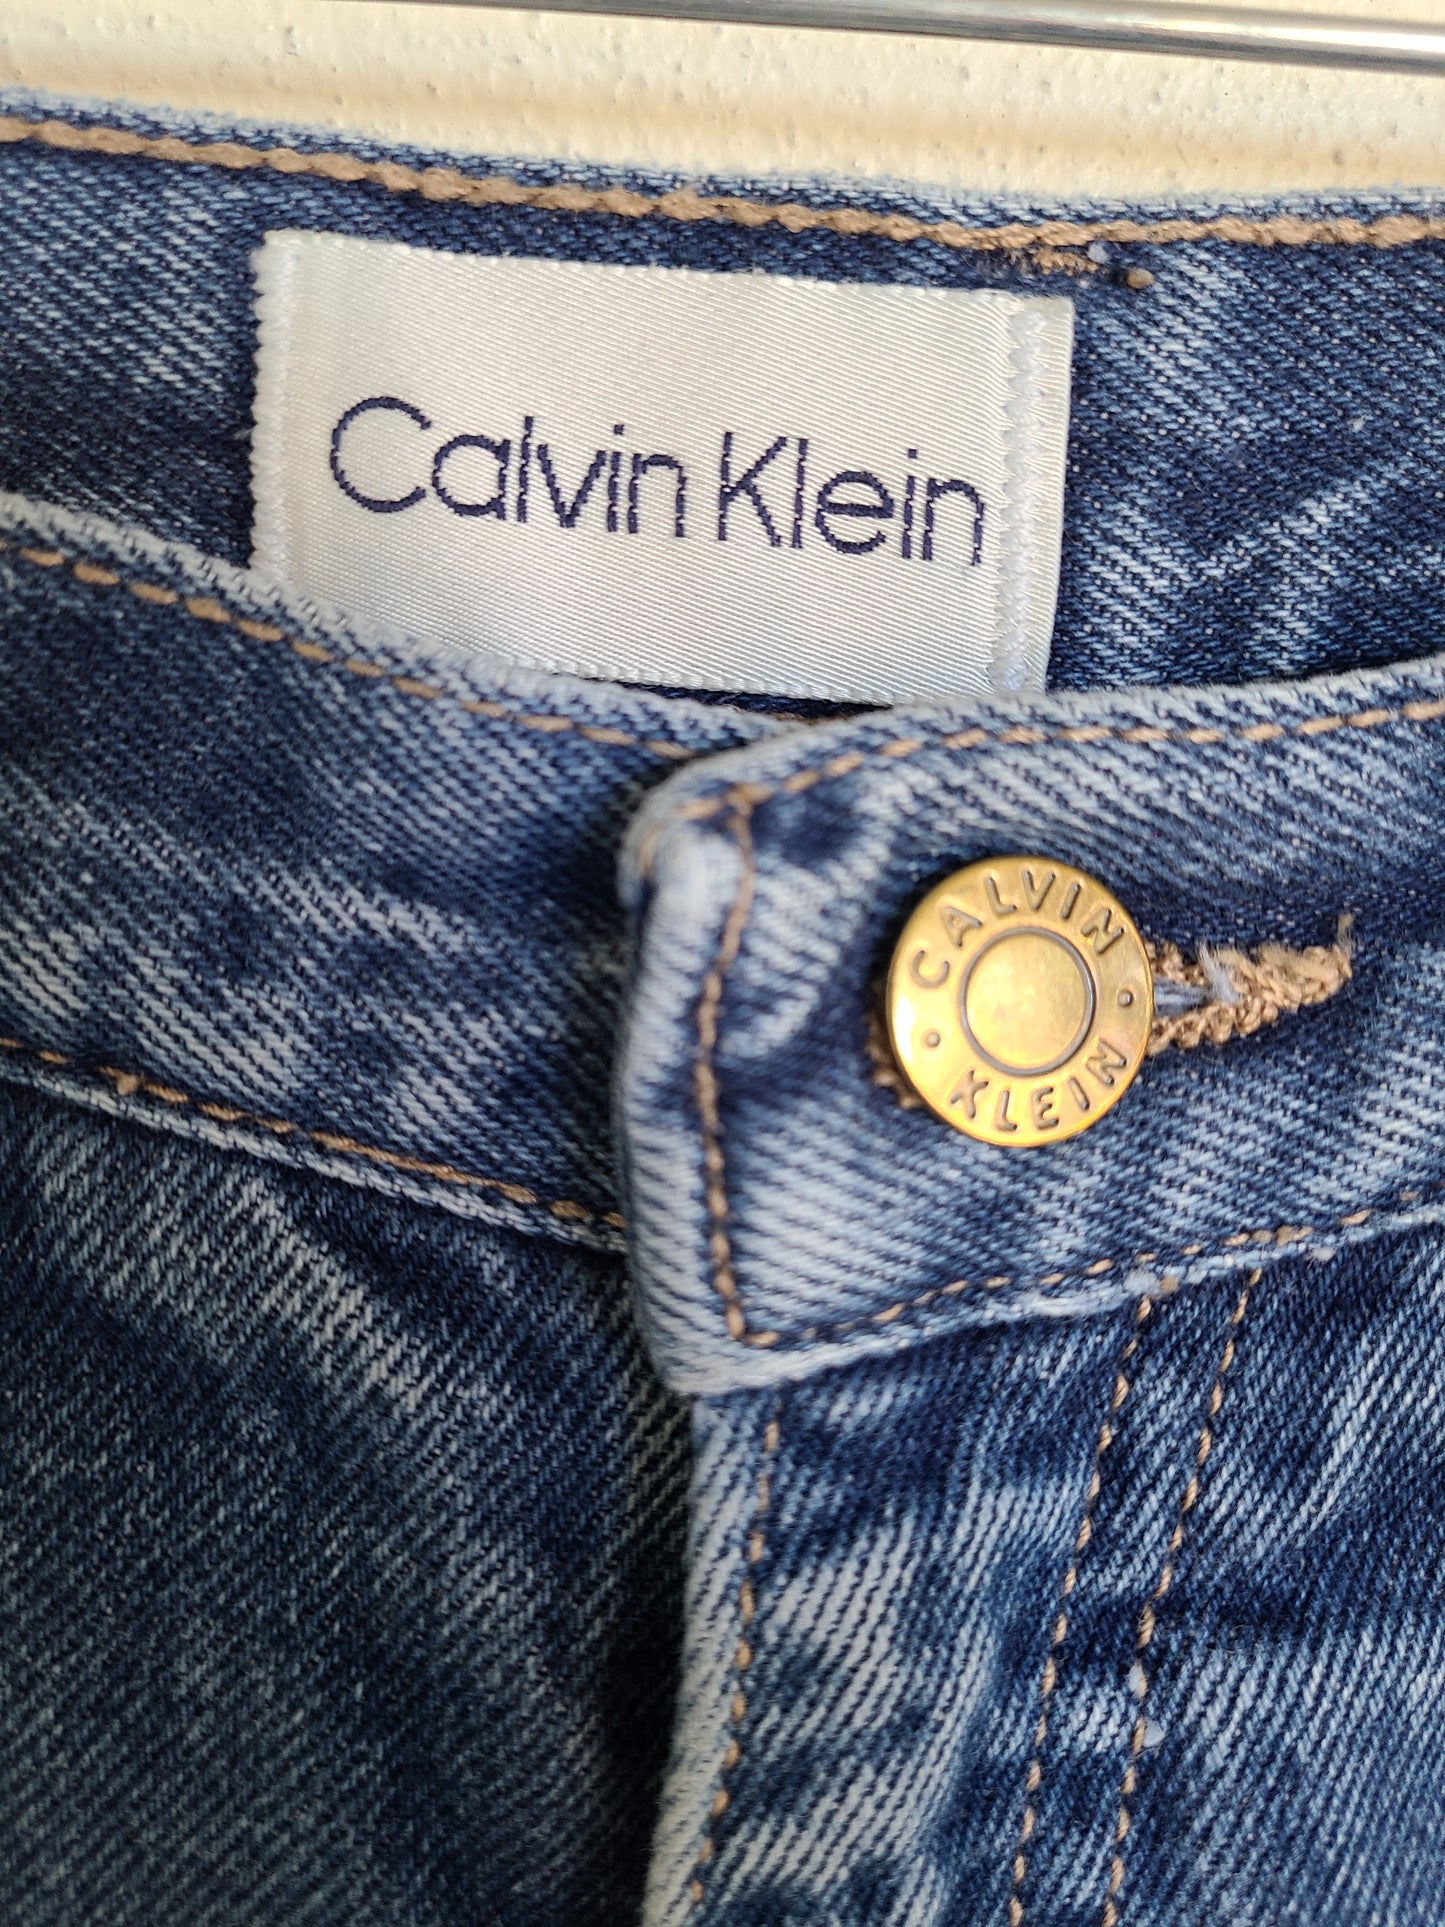 The 90s Does 70s Vintage Calvin Klein Straight Leg Jeans 24-25 x 33